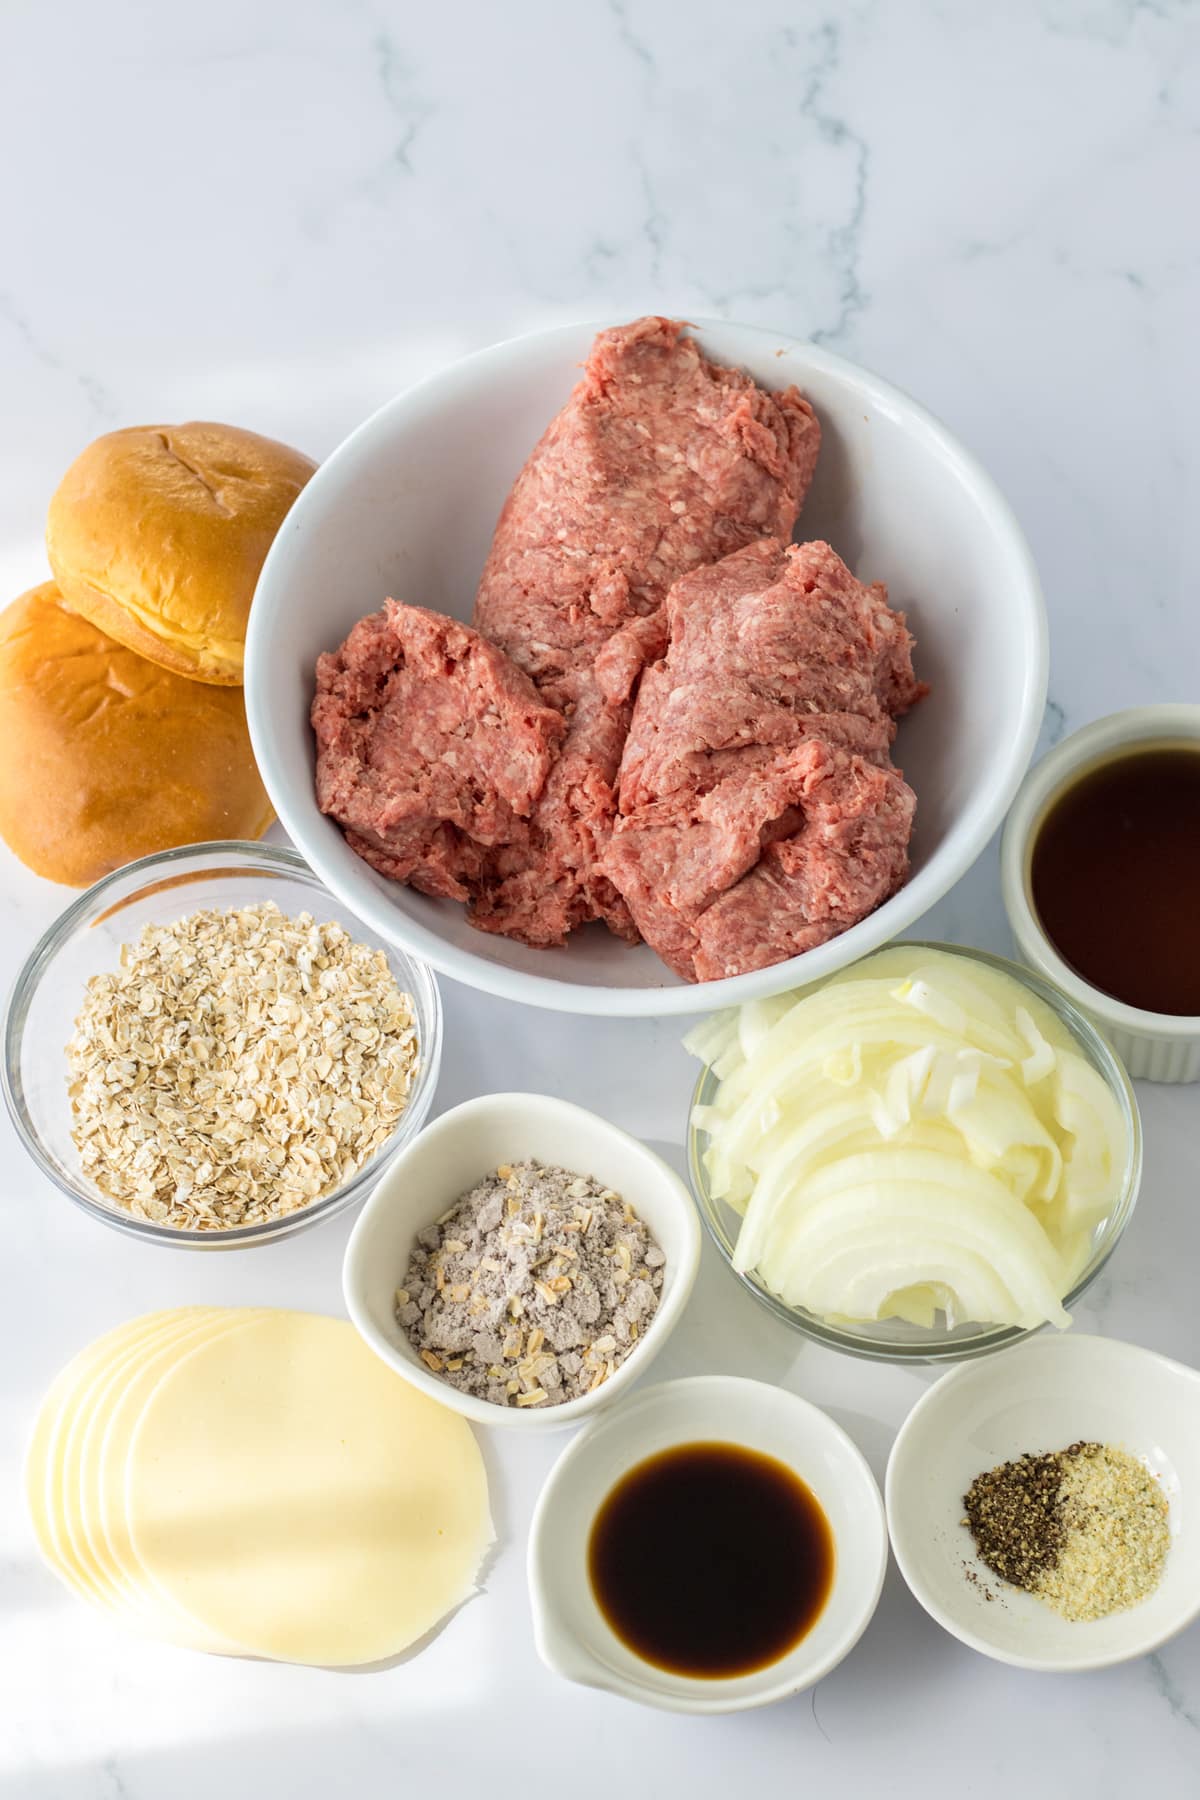 Ingredients for Slow Cooker French Dip Sloppy Joes includes lean ground beef, onion, quick cooking oatmeal (unflavored), beef broth, beefy onion soup mix, Worcestershire sauce (or soy sauce), garlic powder, black pepper, provolone cheese, and slider buns